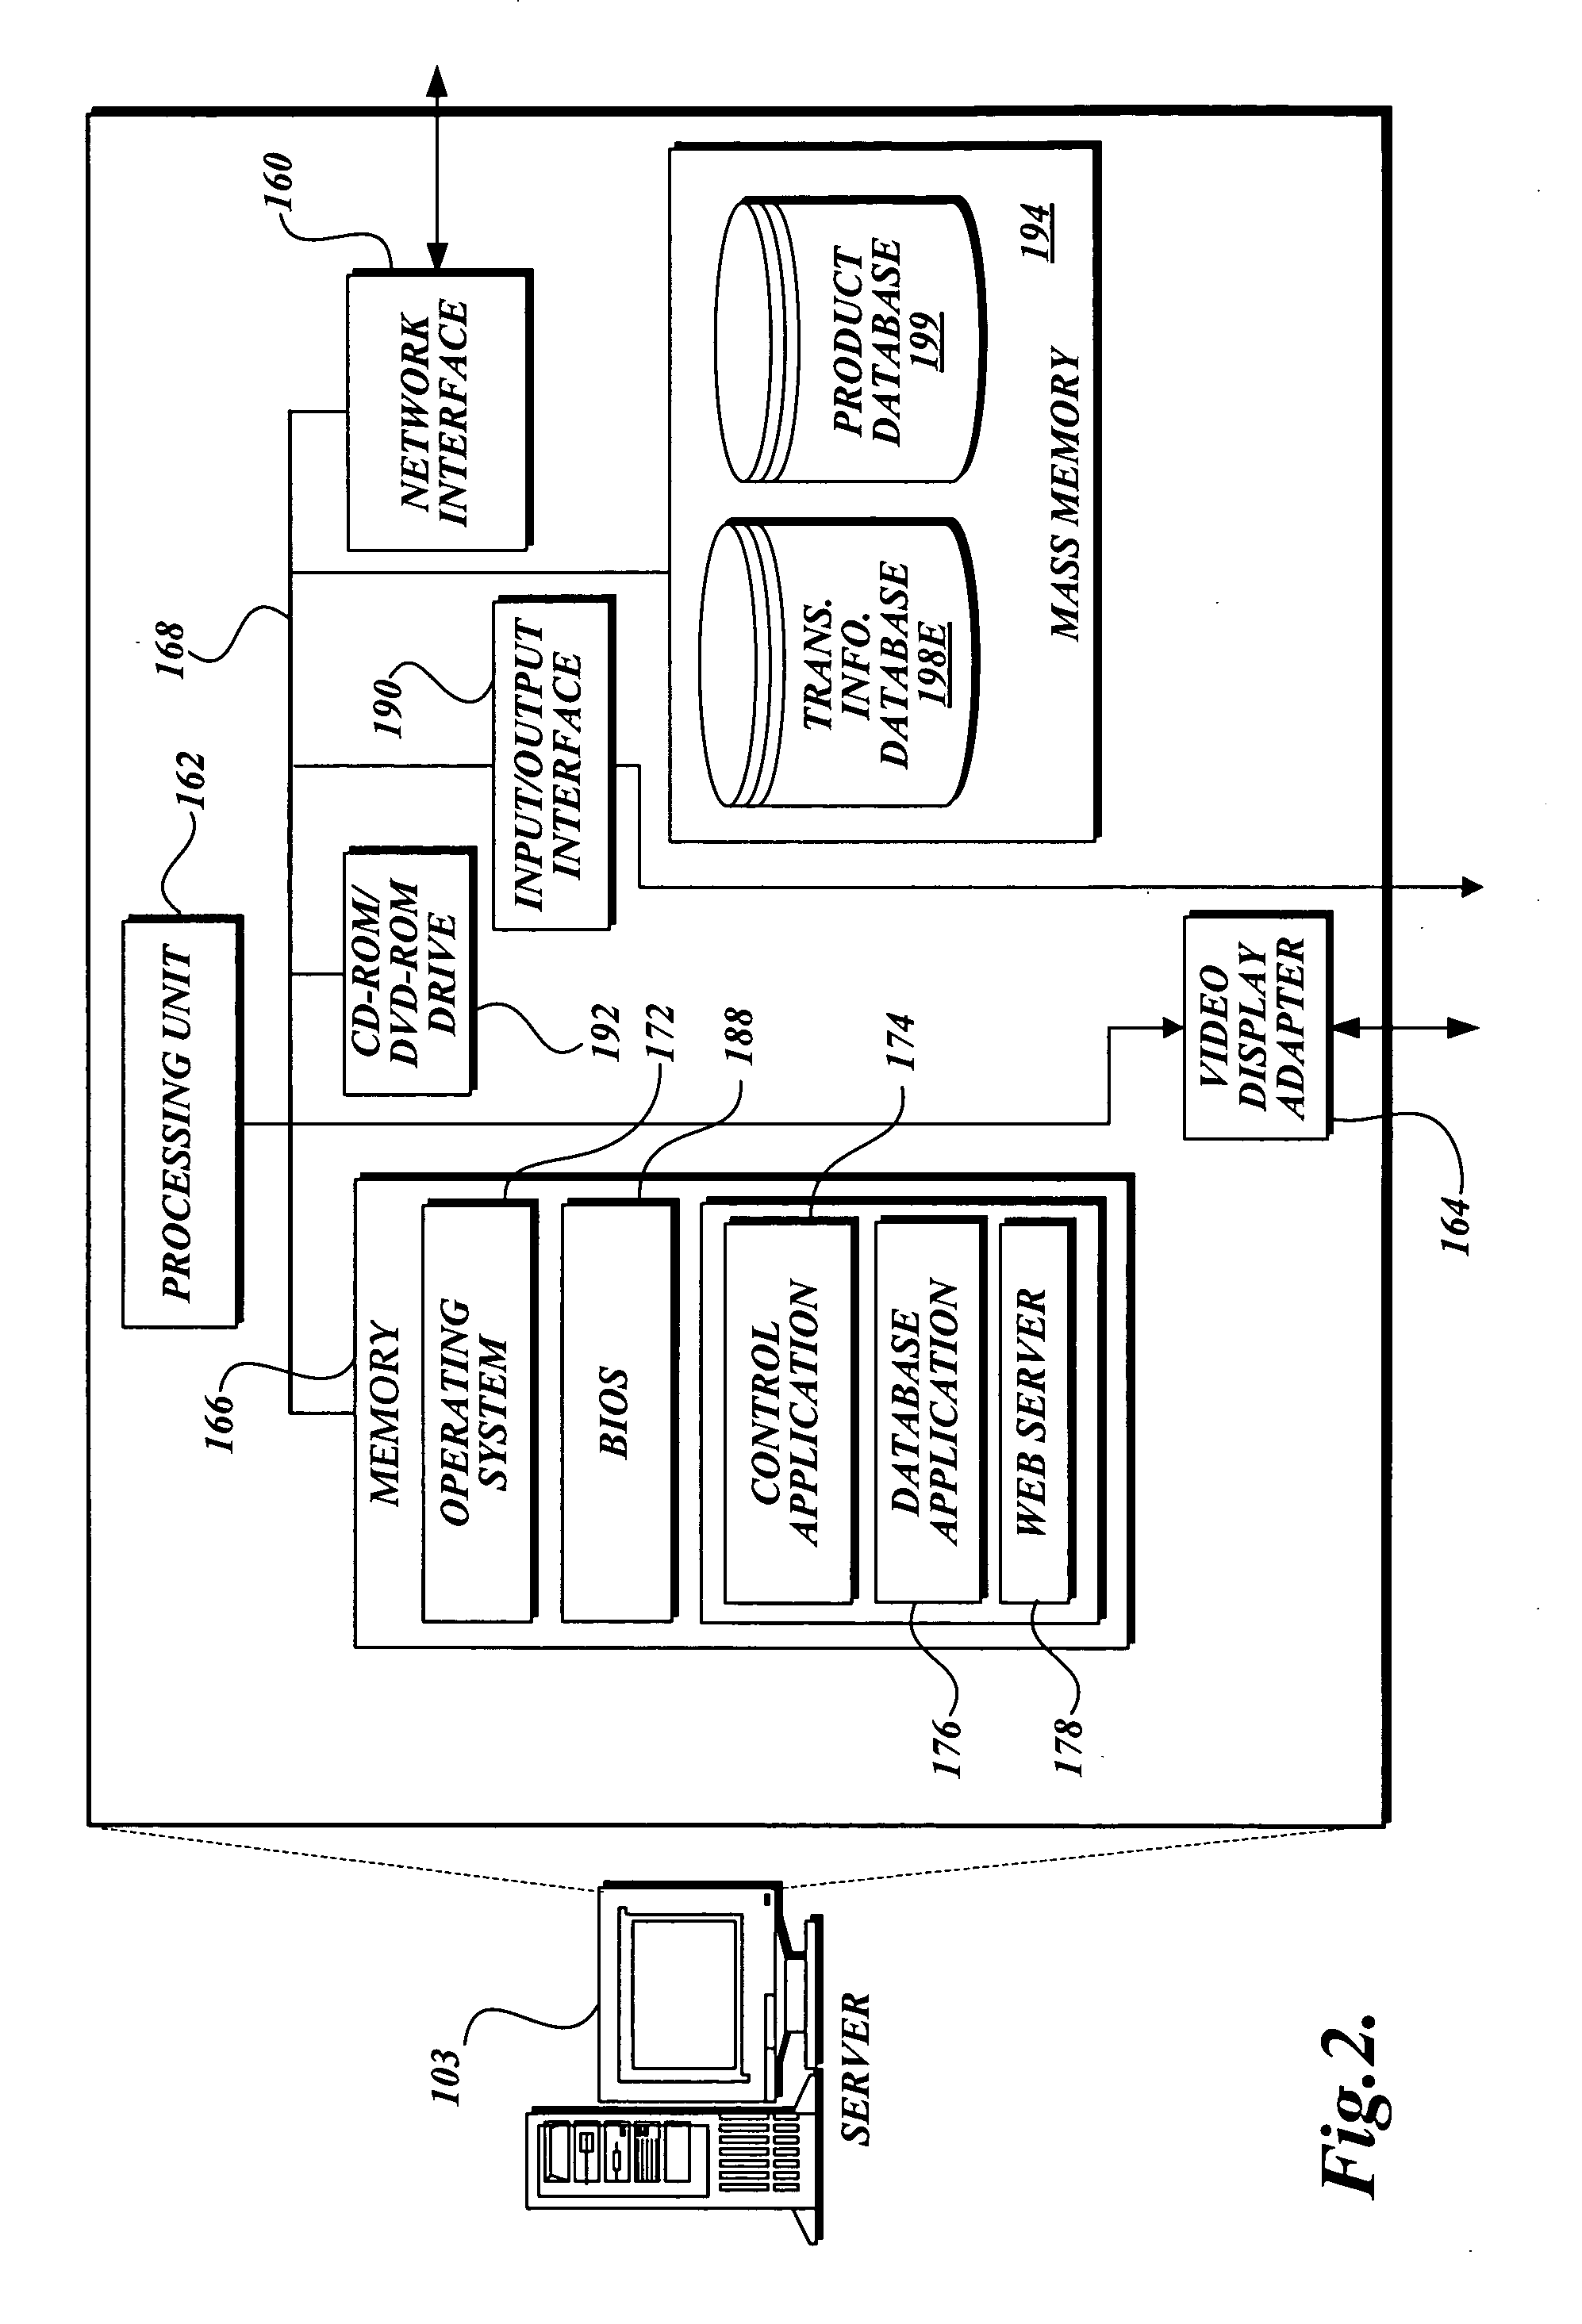 Method and system for managing access to media files